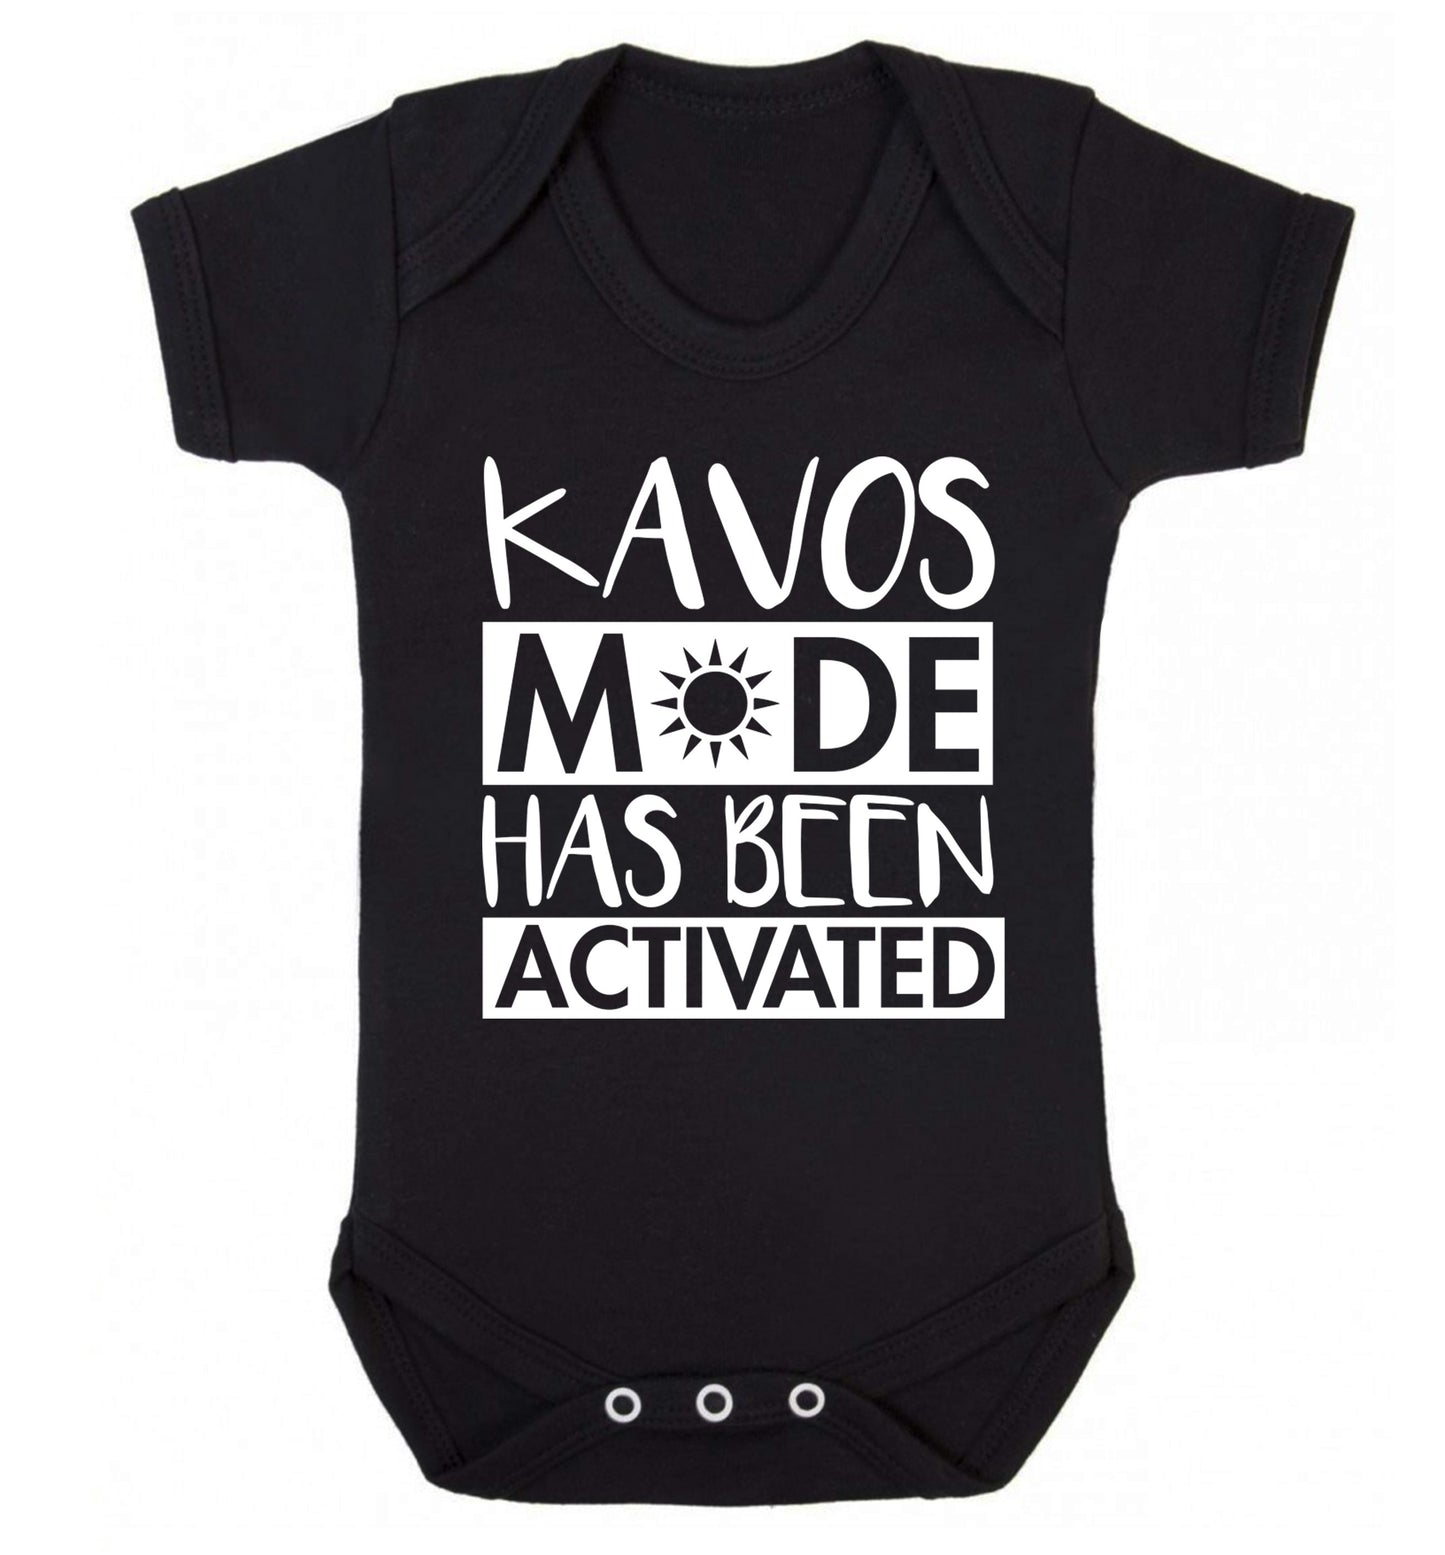 Kavos mode has been activated Baby Vest black 18-24 months